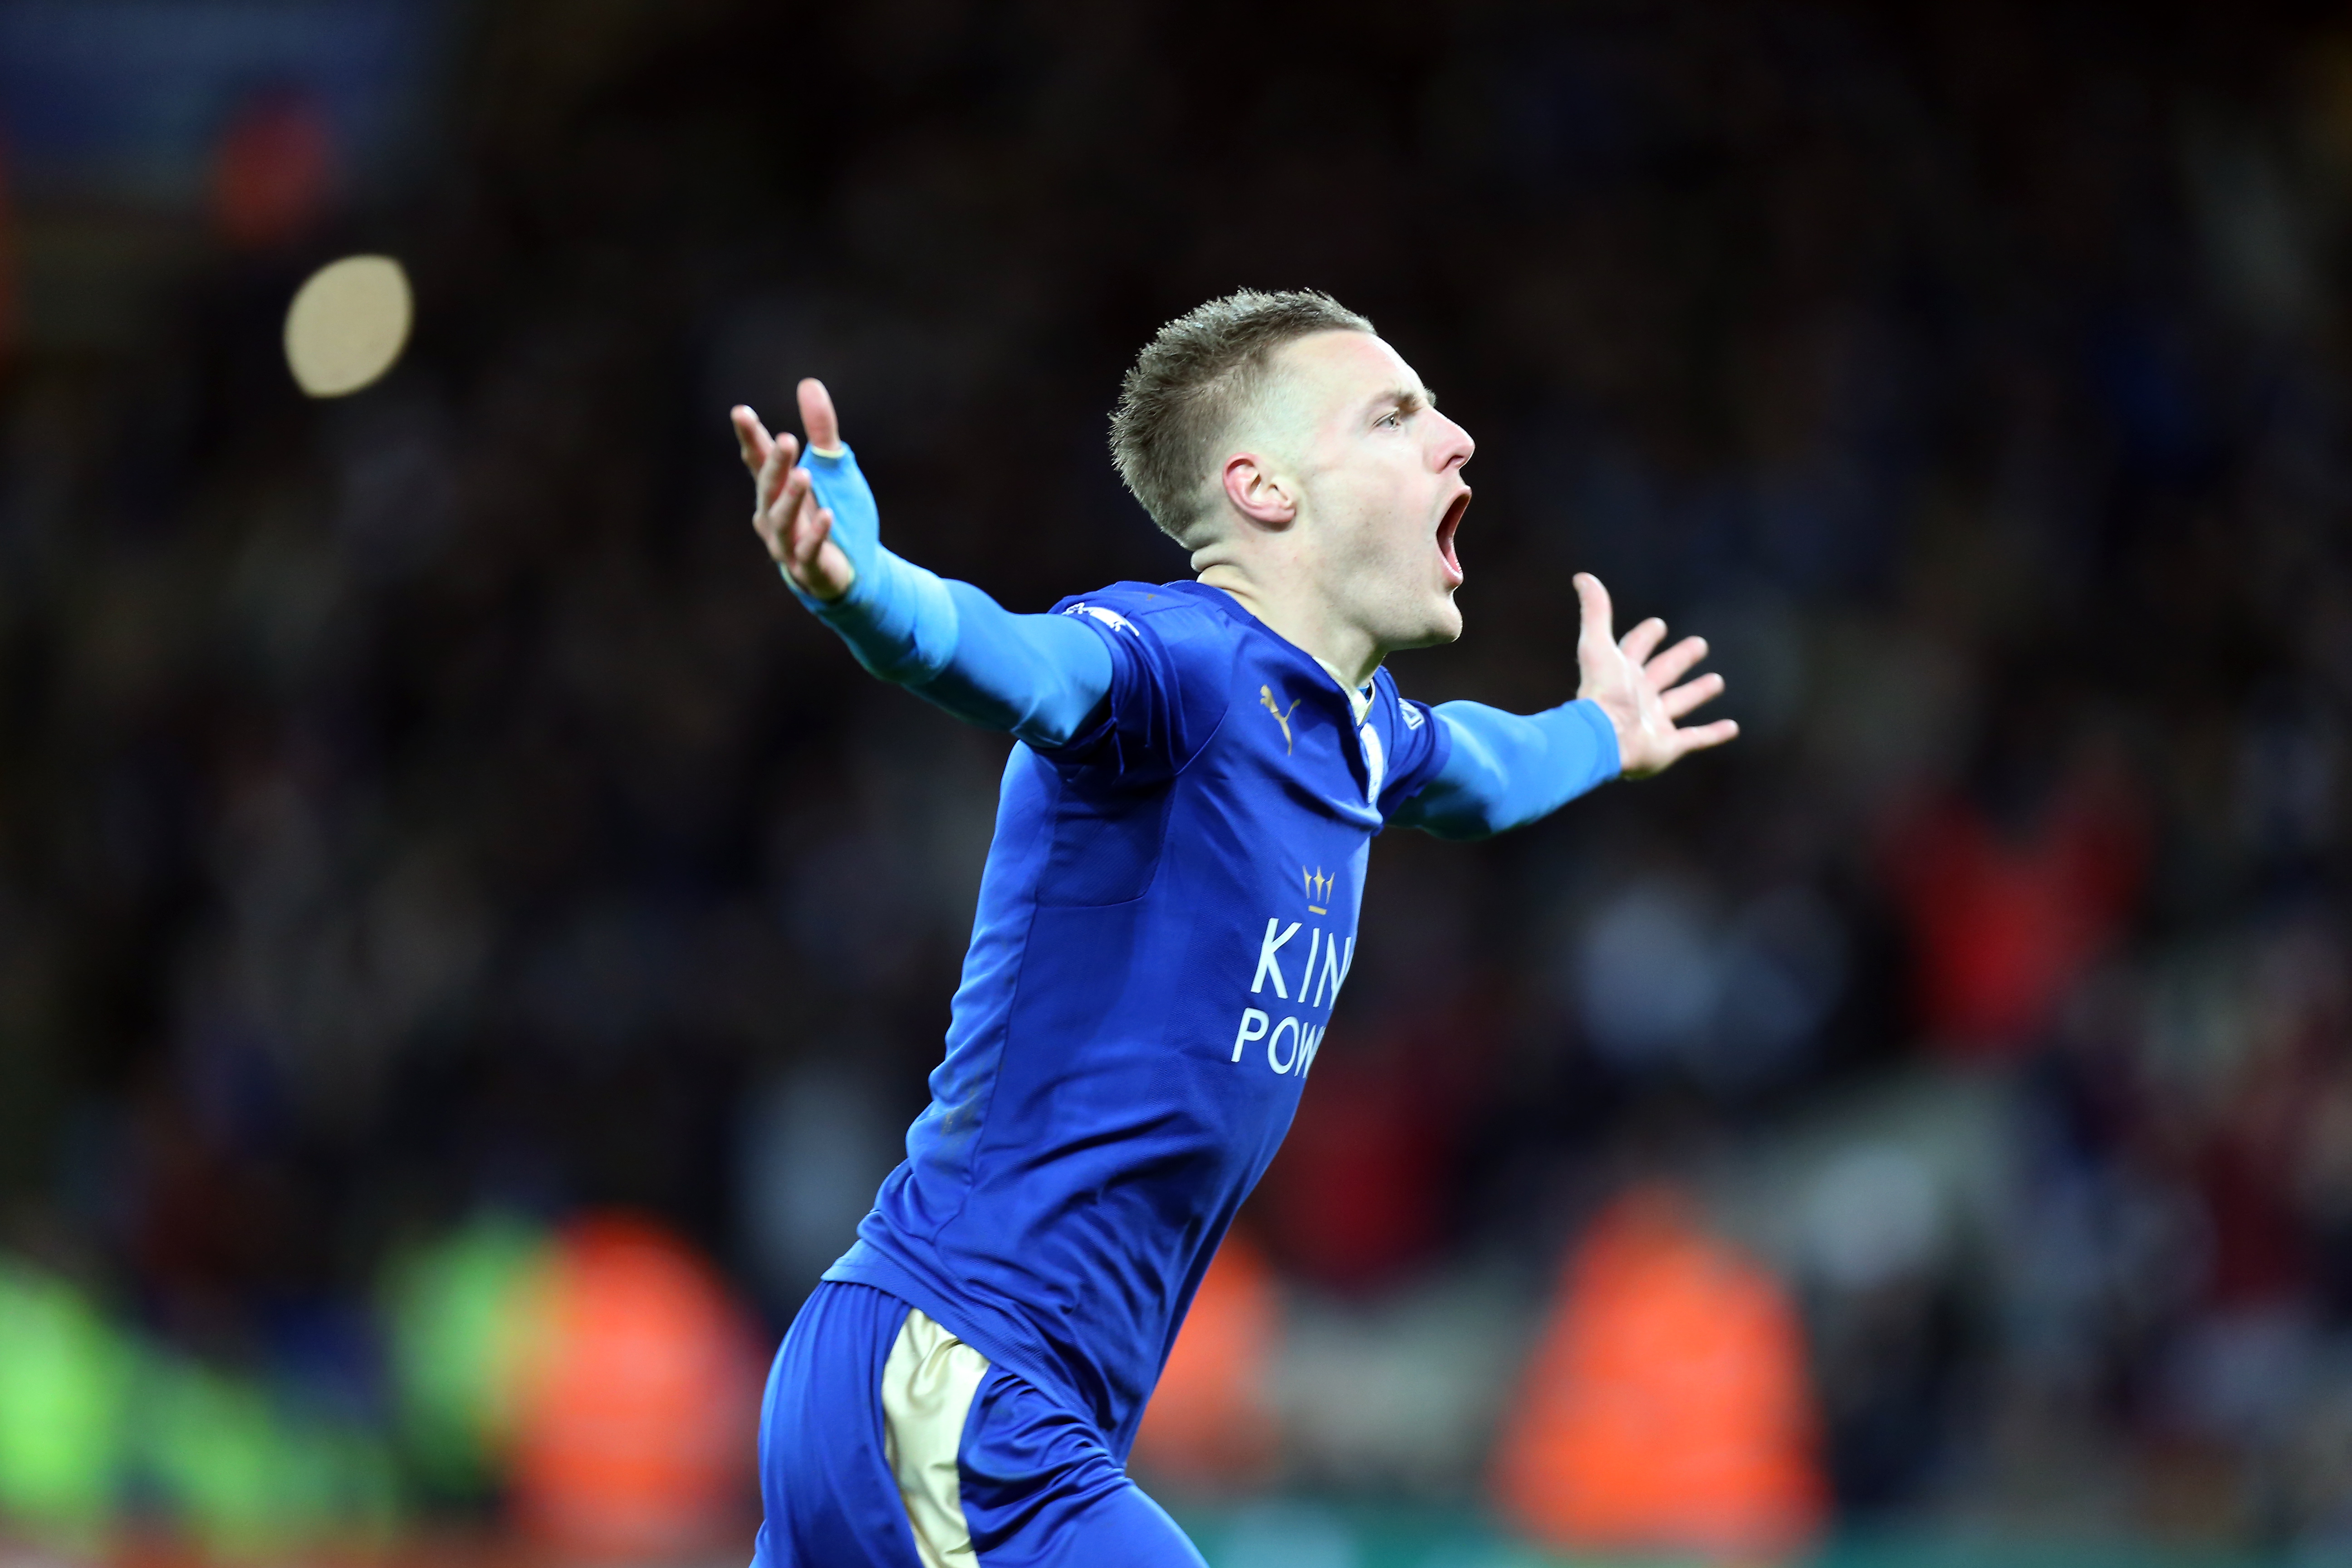 Jamie Vardy celebrates after scoring for Leicester City against Liverpool in February 2016.